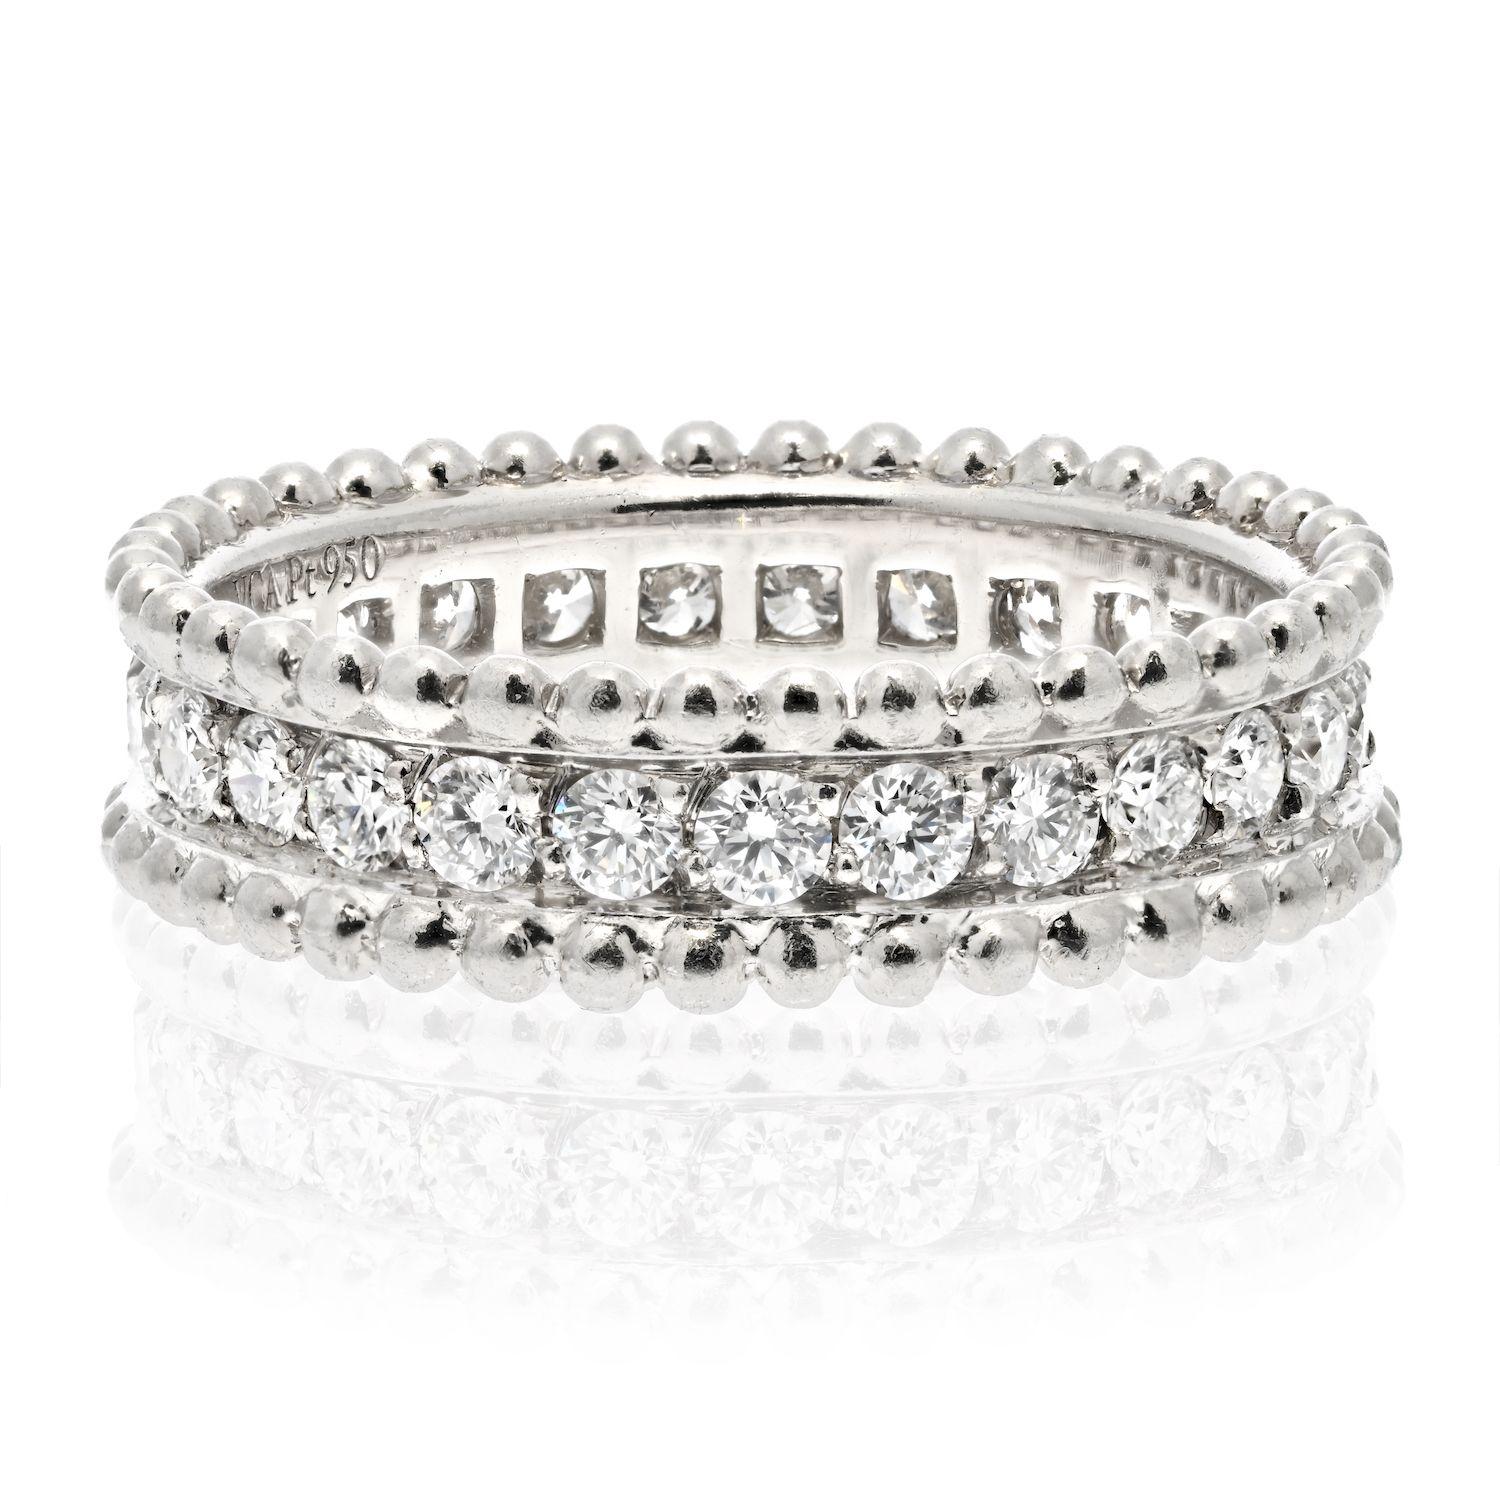 Wow, this Van Cleef & Arpels Platinum Perlee Diamond Round Cut Row Wedding Band Ring looks stunning! It's the perfect choice for an elegant and timeless piece of jewelry. The diamond rounds are so sparkly and the platinum setting is so classic. We